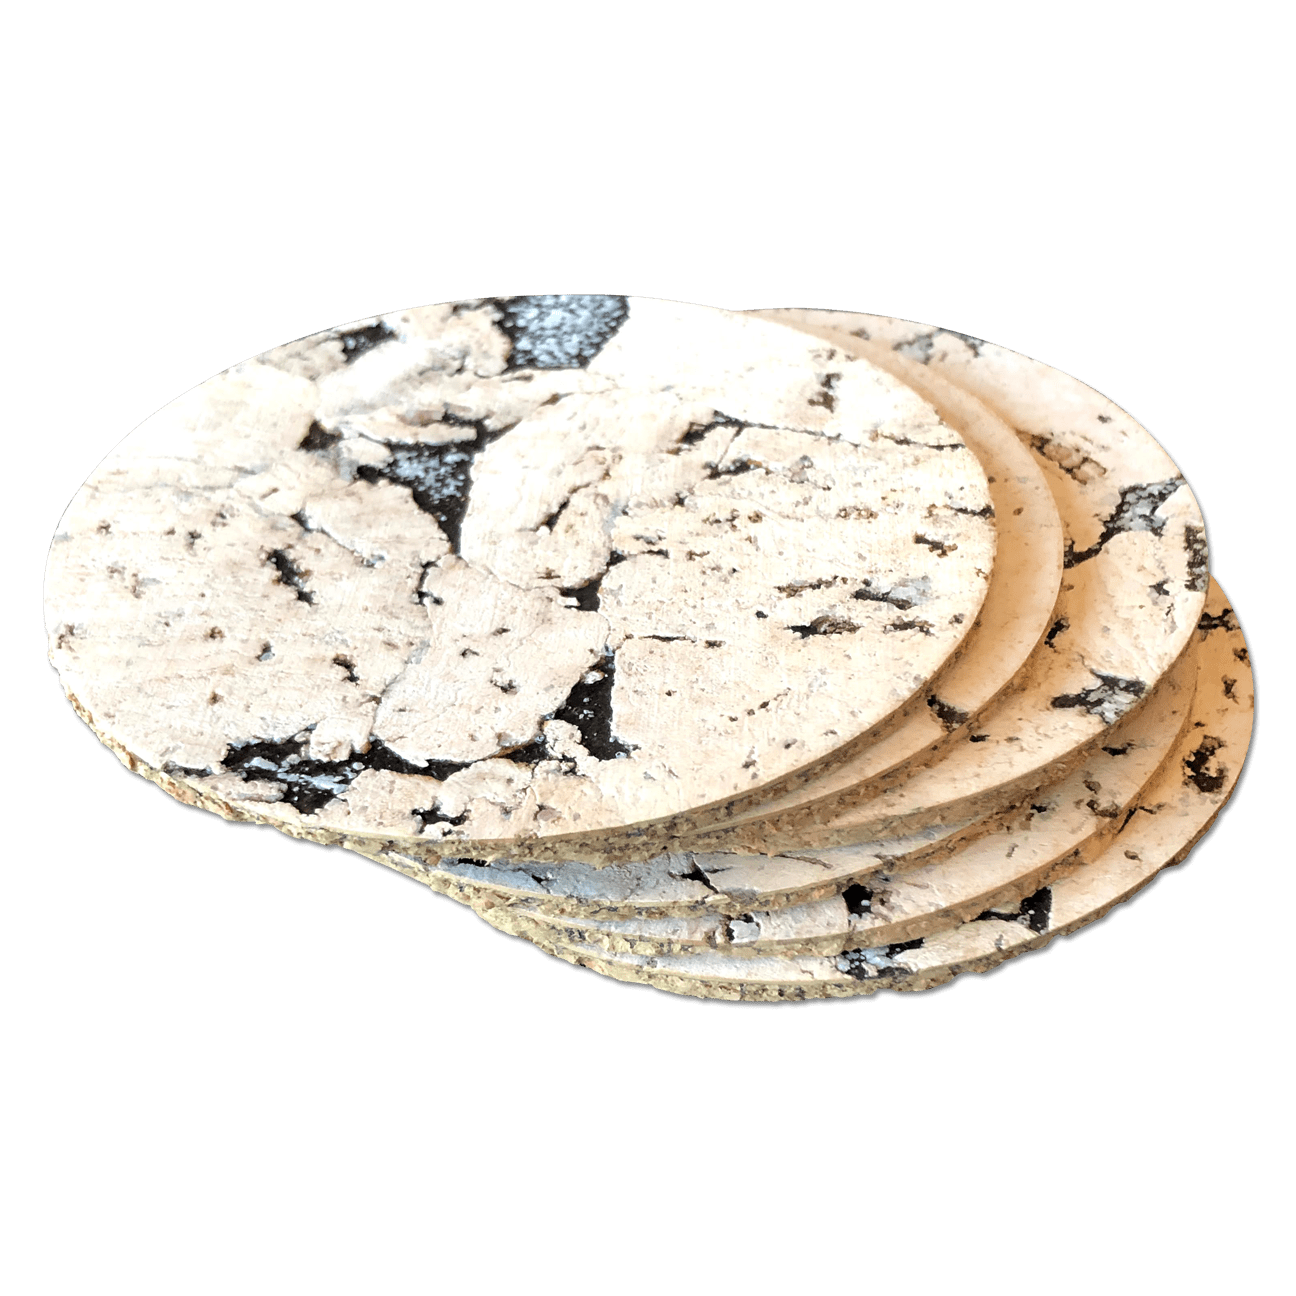 Panchh Rustic Farmhouse Stone & Cork Coasters for Drinks, Absorbent - Set of 6 Coasters with Holder - Best Housewarming Gifts for New Home Ideas - Cut